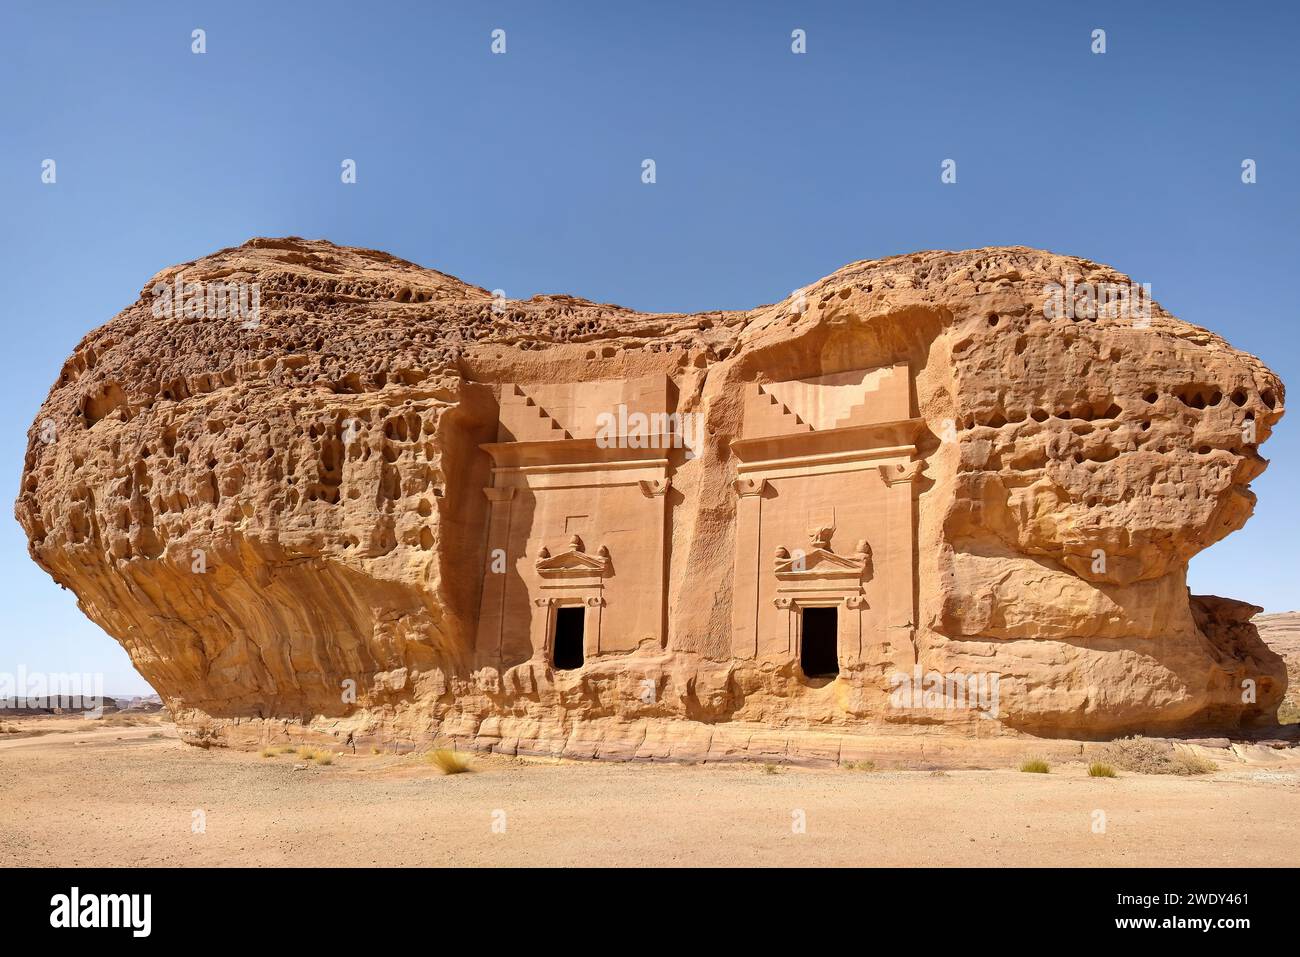 Hegra also known as Mada’in Salih is a archaeological site located in the area of Al-'Ula. A majority of the remains date from the Nabataean Kingdom. Stock Photo